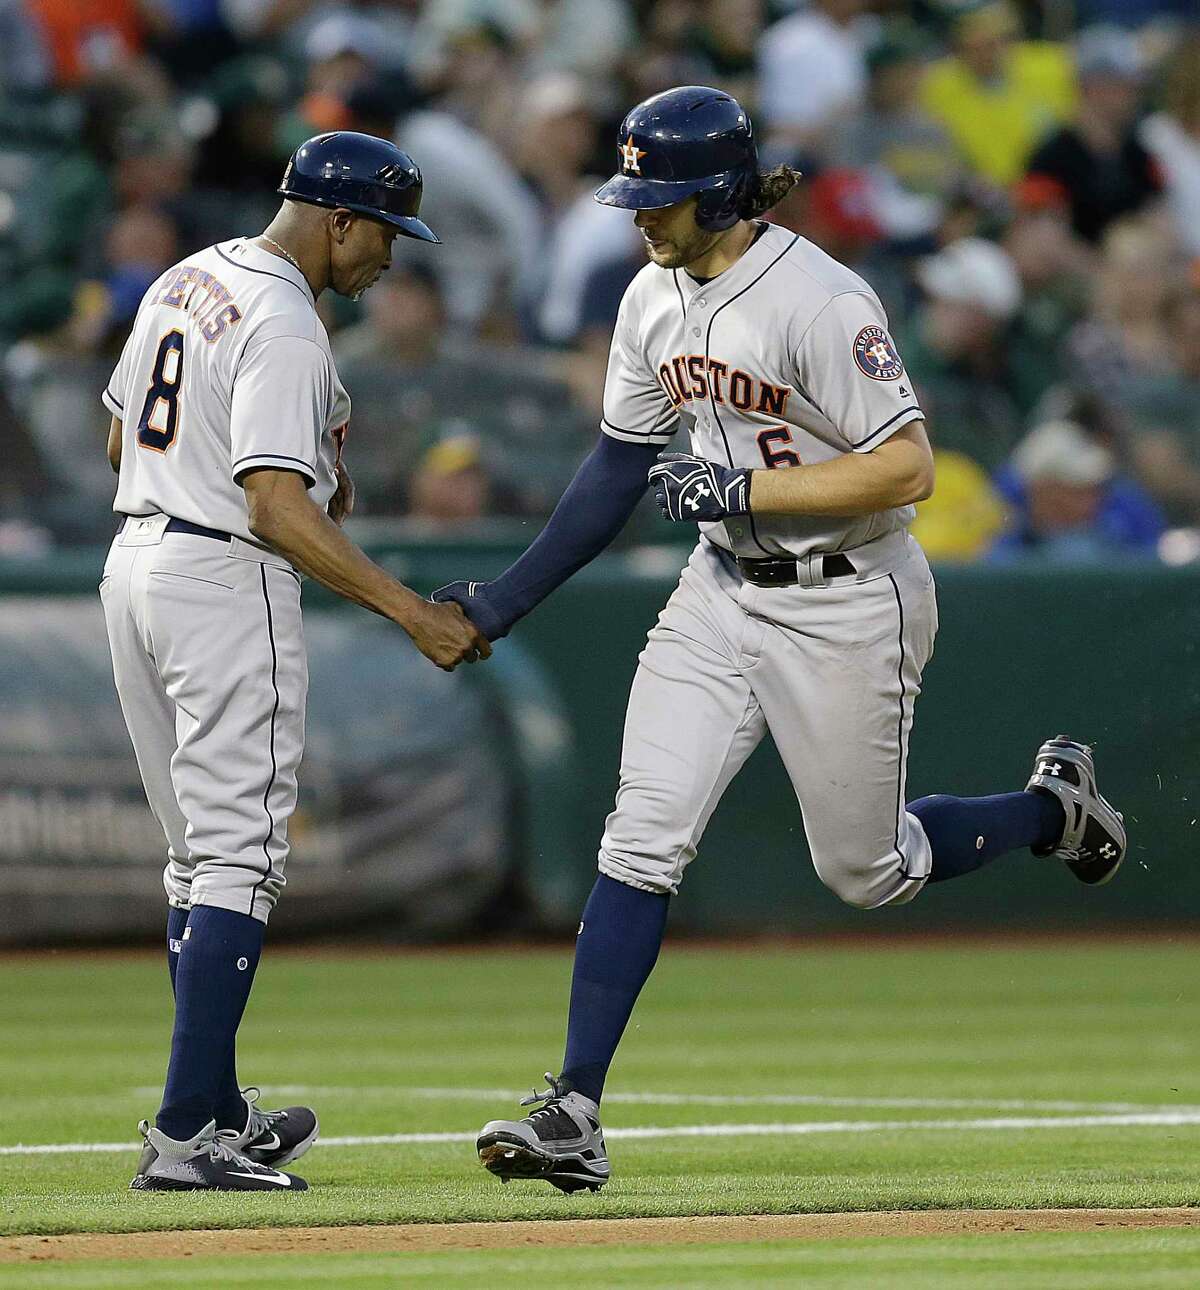 Houston Astros' Jake Marisnick, right, celebrates with third base coach Gary Pettis (8) after hitting a two run home run off Oakland Athletics' Daniel Gossett in the fifth inning of a baseball game Monday, June 19, 2017, in Oakland, Calif. (AP Photo/Ben Margot)